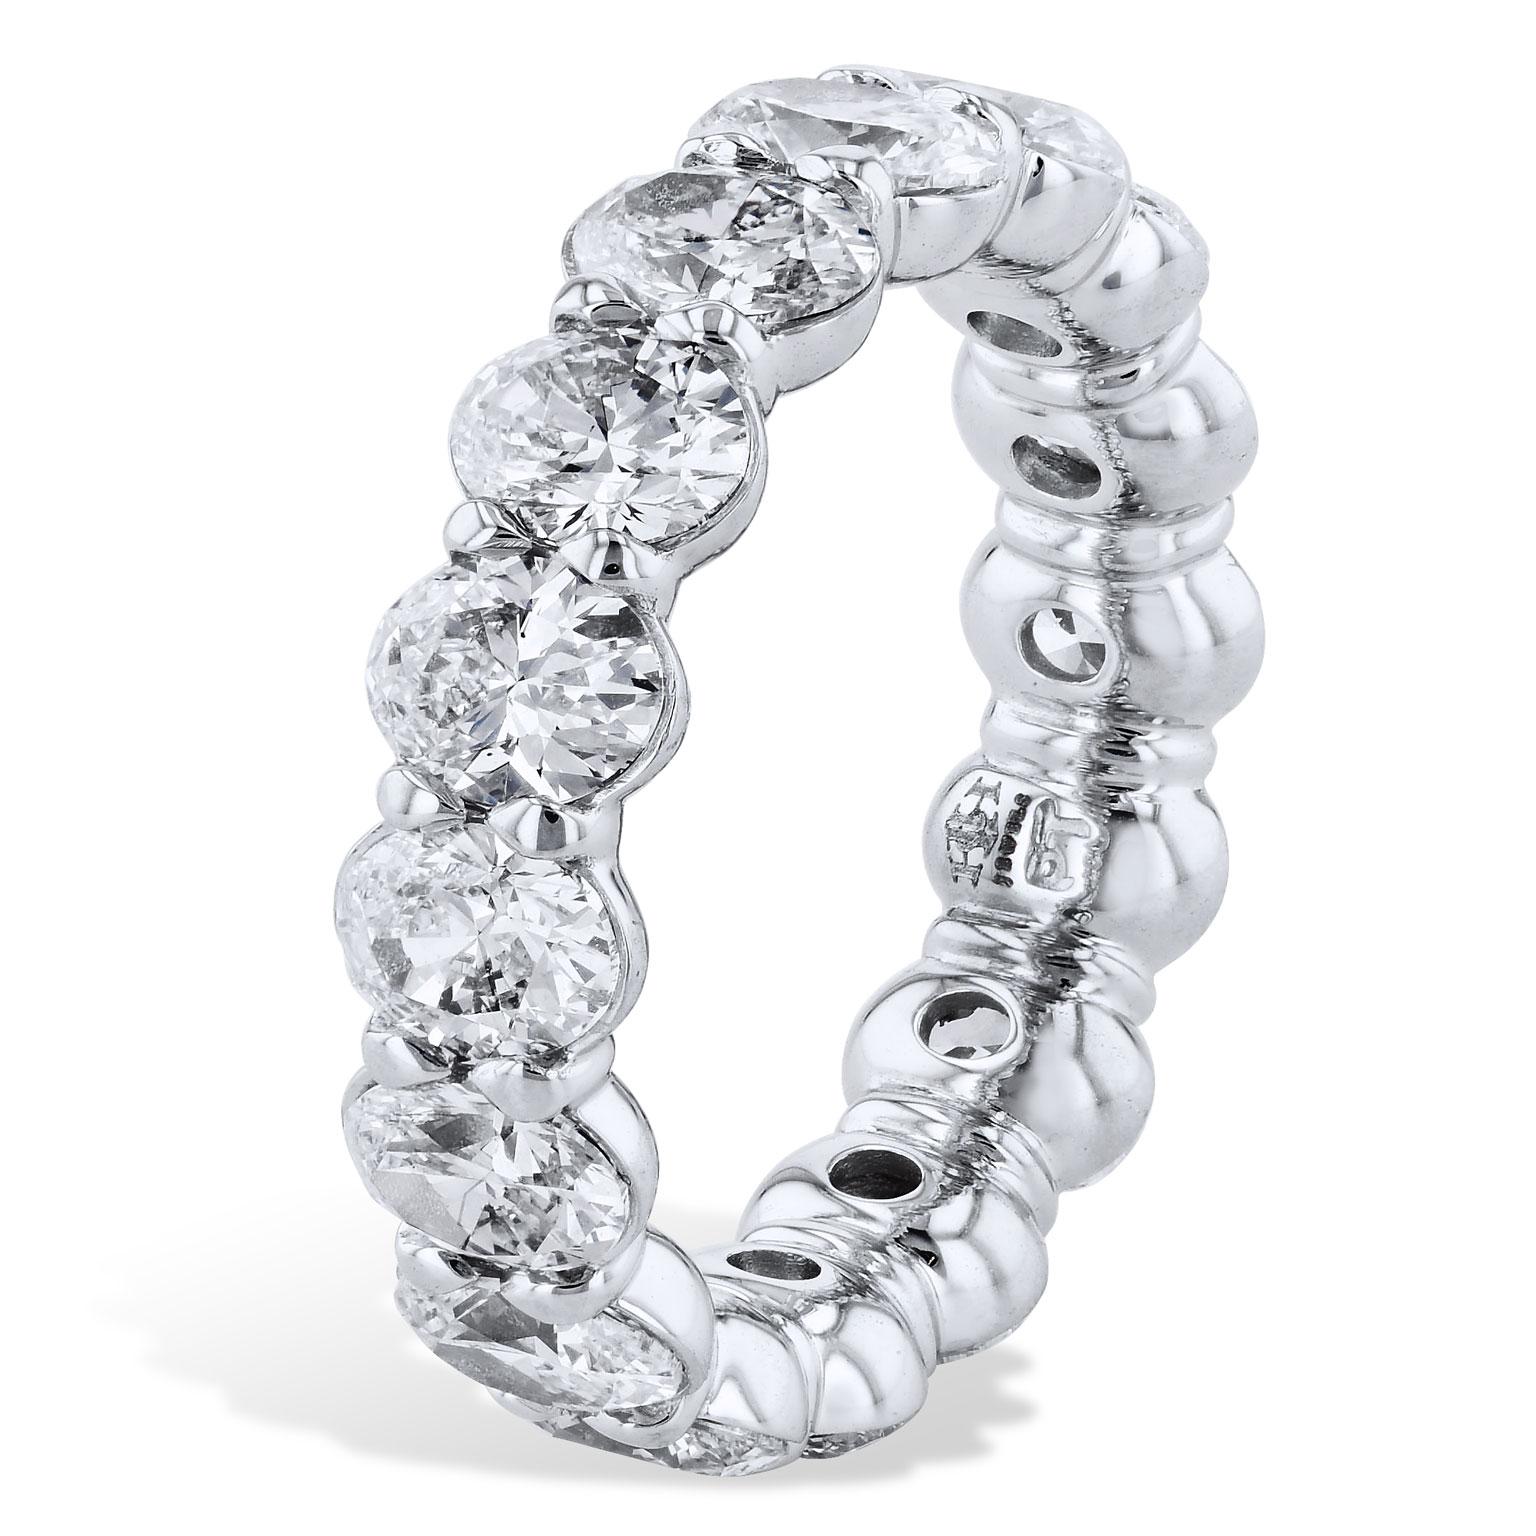 5.01 Carat Total Weight Oval Diamond Eternity Band Buttercup Setting Ring Size 6.5

This stunning 5.01 carat of oval-shaped diamonds (H/VS2) are shared-prong buttercup mounted in this platinum eternity band. 
This ring provides a mosaic of light and